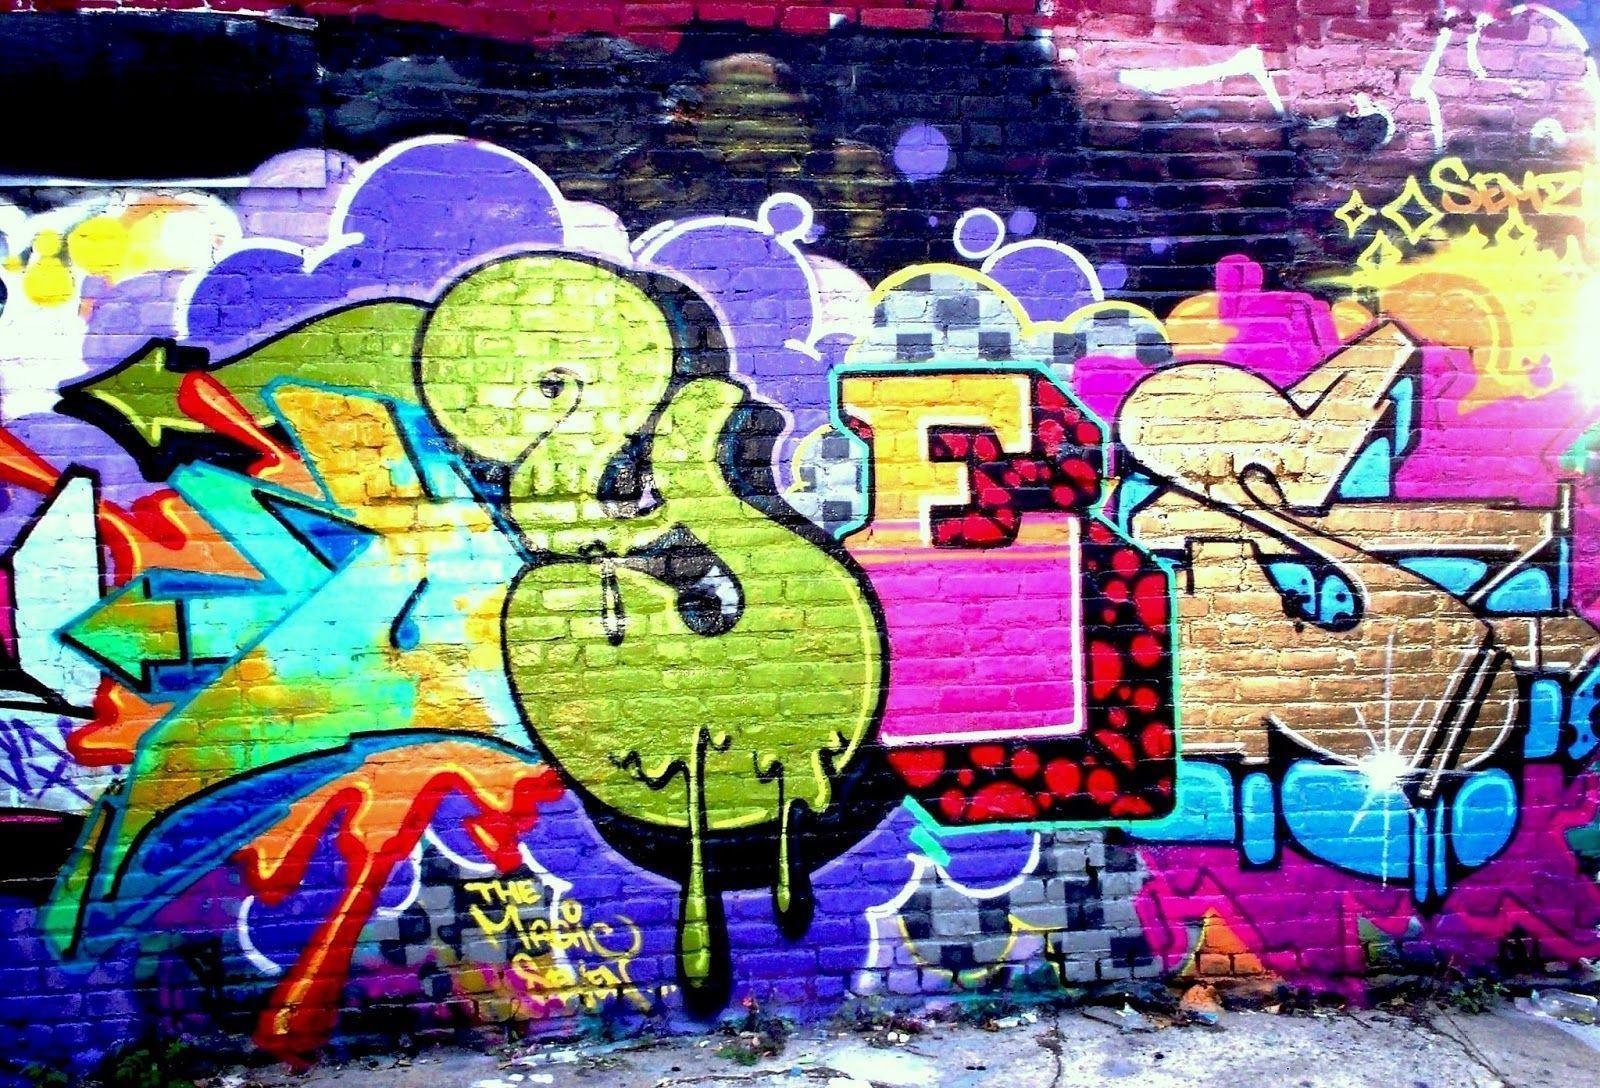 Hd Graffiti Wallpapers Iphone Wallpapers 1600x1088PX ~ Wallpapers